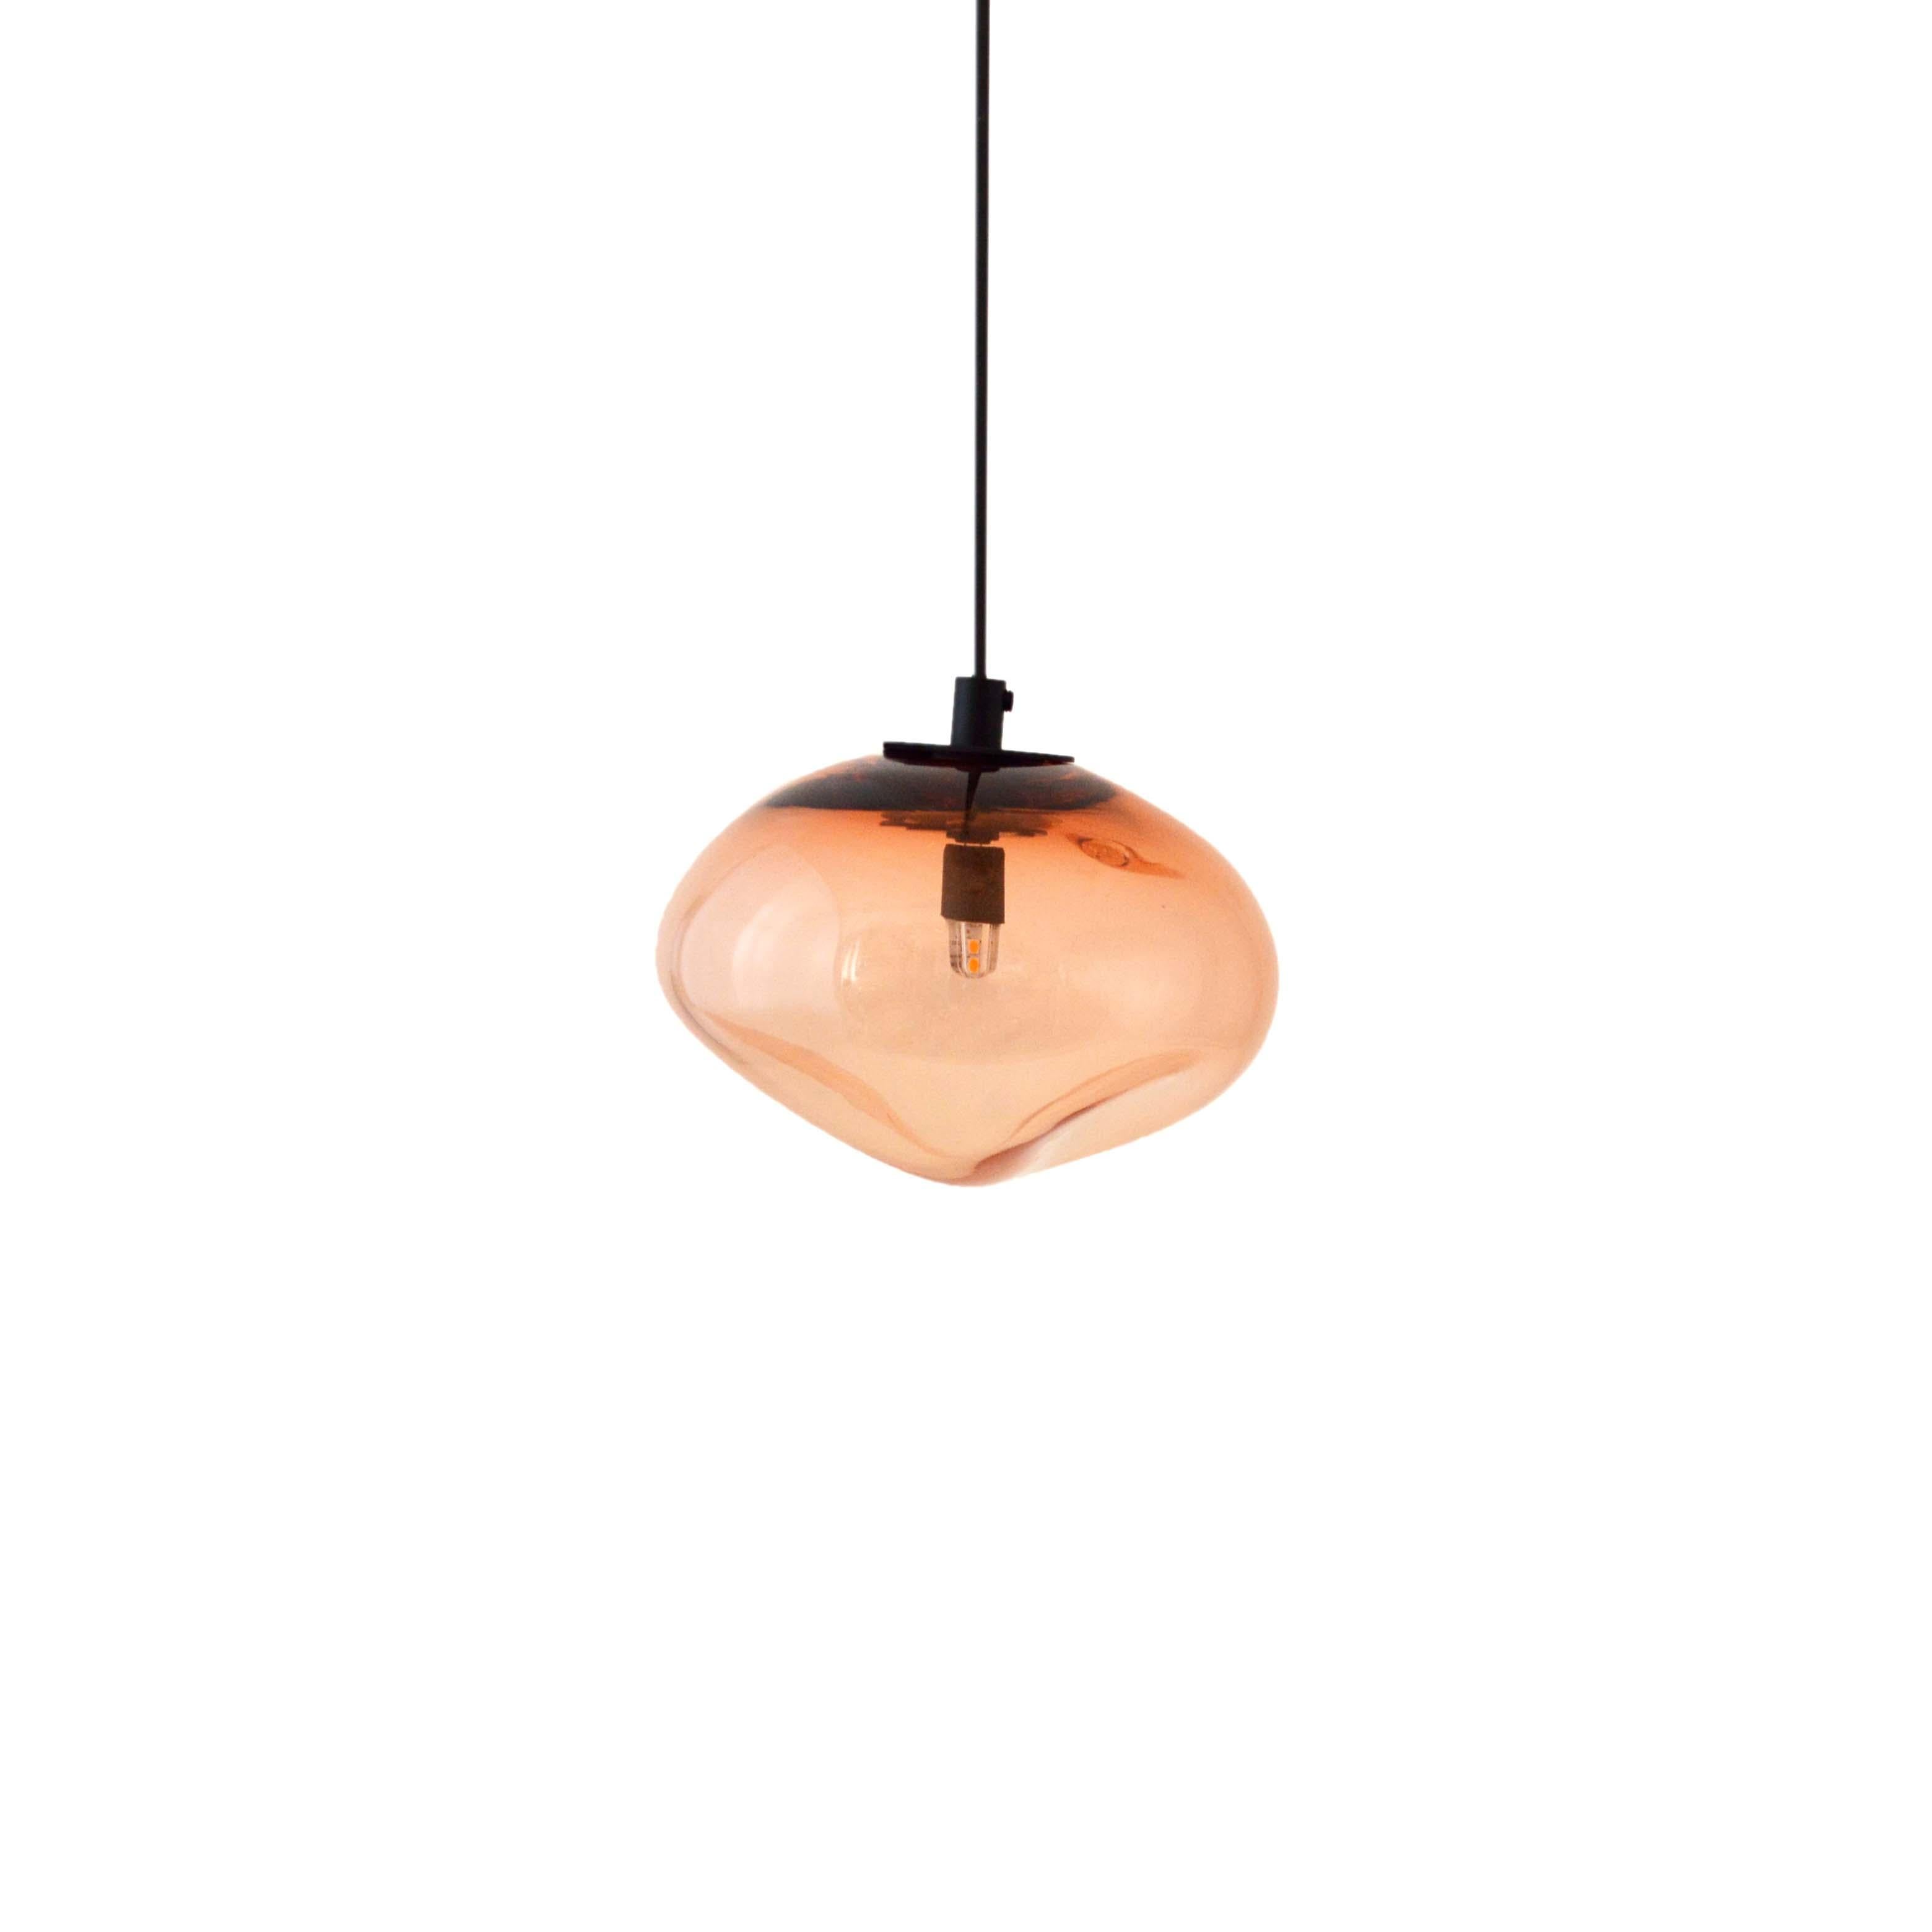 Starglow coral pendant by ELOA
No UL listed 
Material: glass, steel ,silver
Dimensions: D 15 x W 13 x H 100 cm
Also available in different colours and dimensions.

All our lamps can be wired according to each country. If sold to the USA it will be